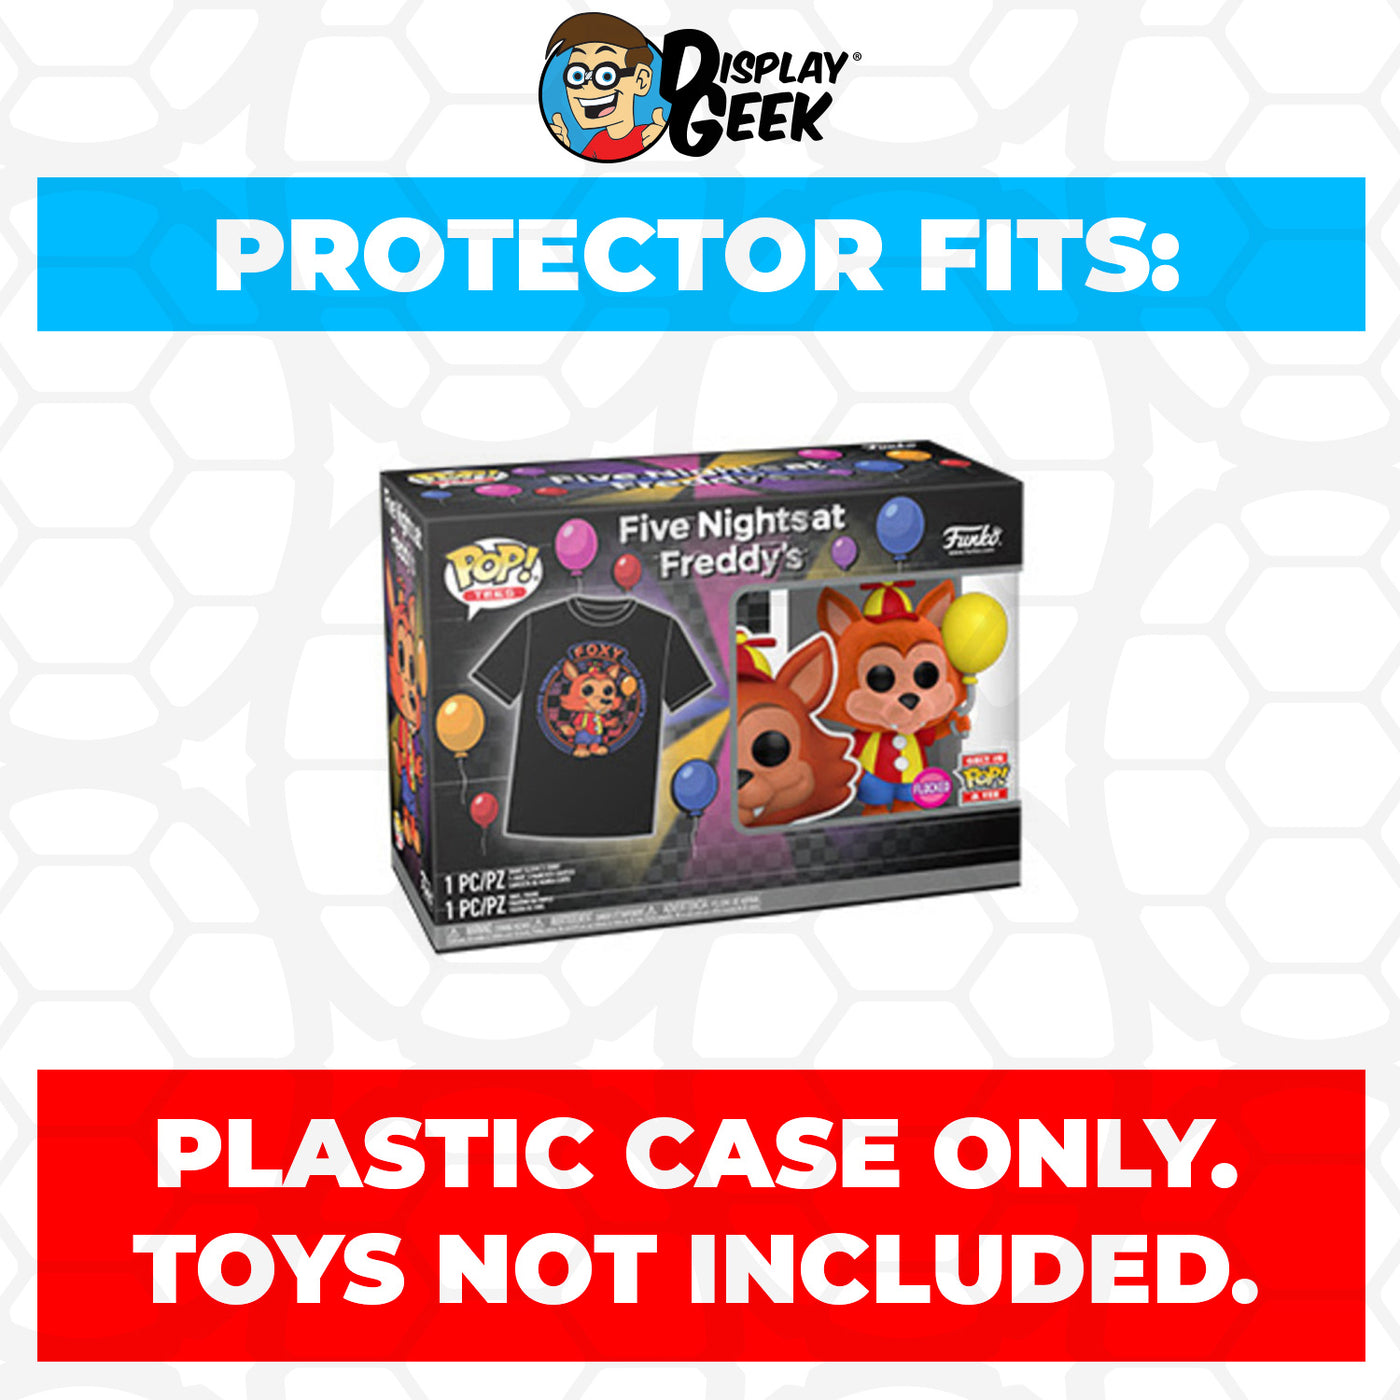 Pop Protector for Pop & Tee Balloon Foxy Flocked #907 Funko Box on The Protector Guide App by Display Geek